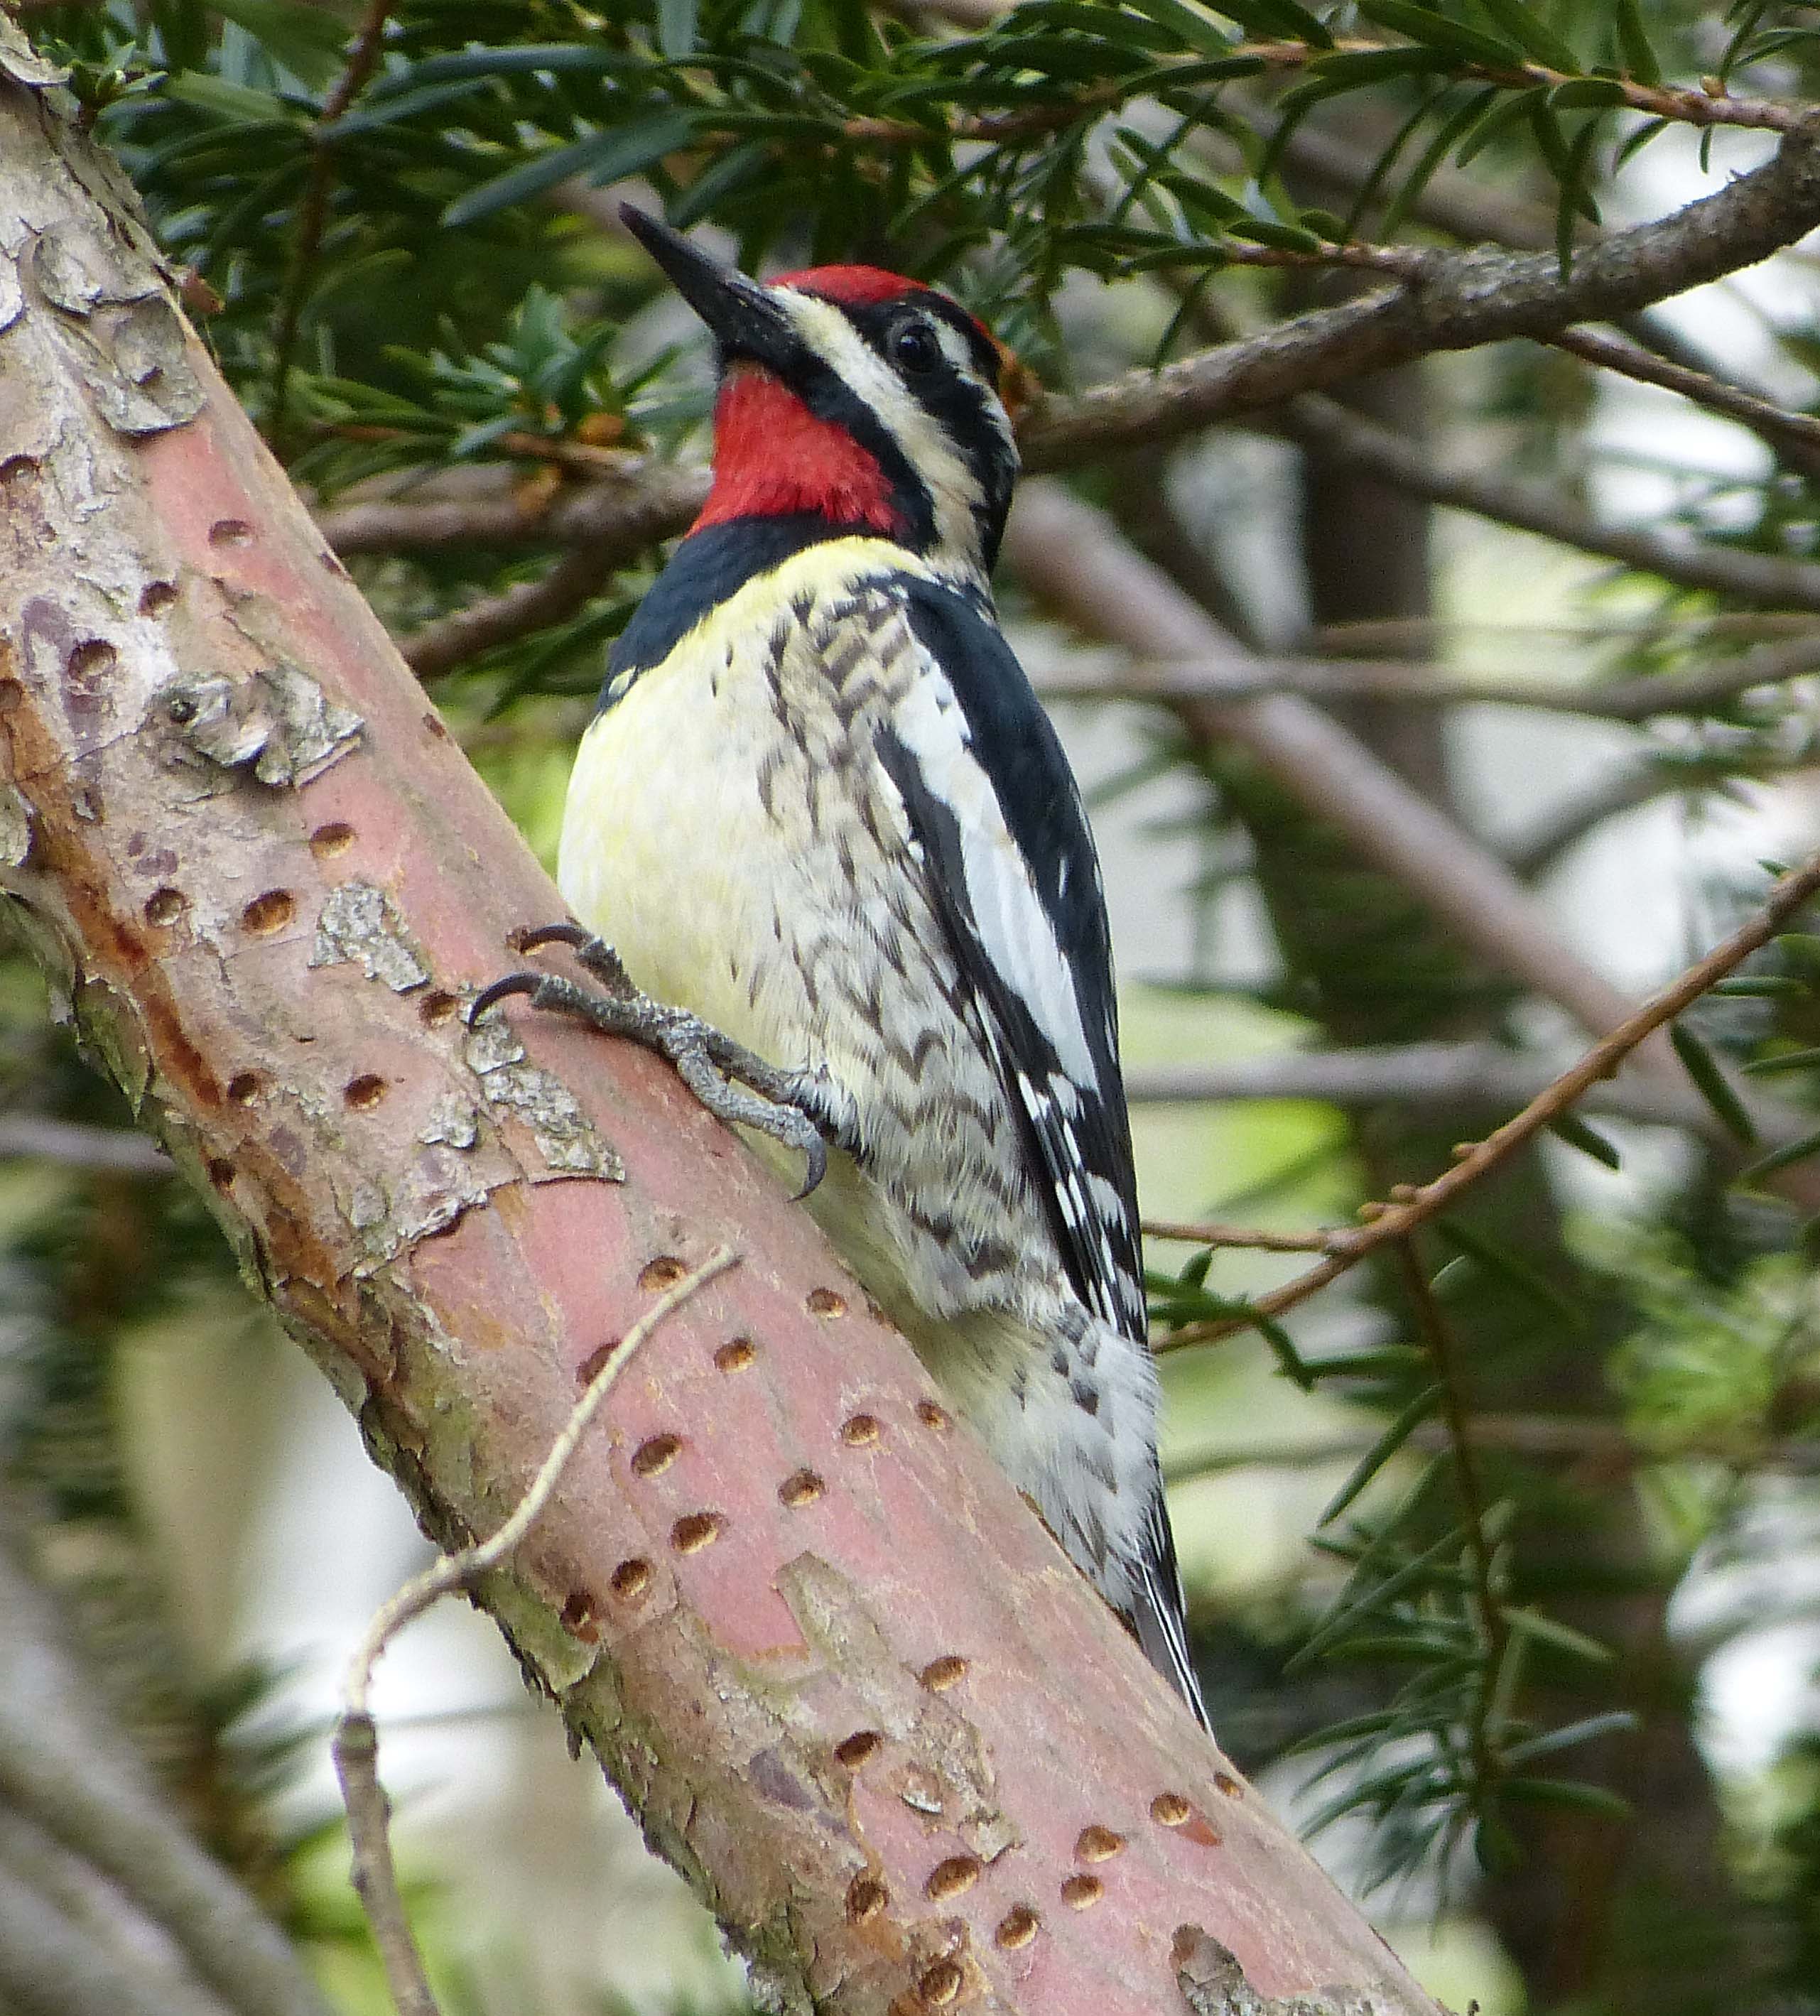 Yellow-Bellied Sapsucker (male) showing the diagnostic white bar on the wings and subtle yellow cast to the breast. The lines of small holes in the branch are typical of this birds feeding habit.